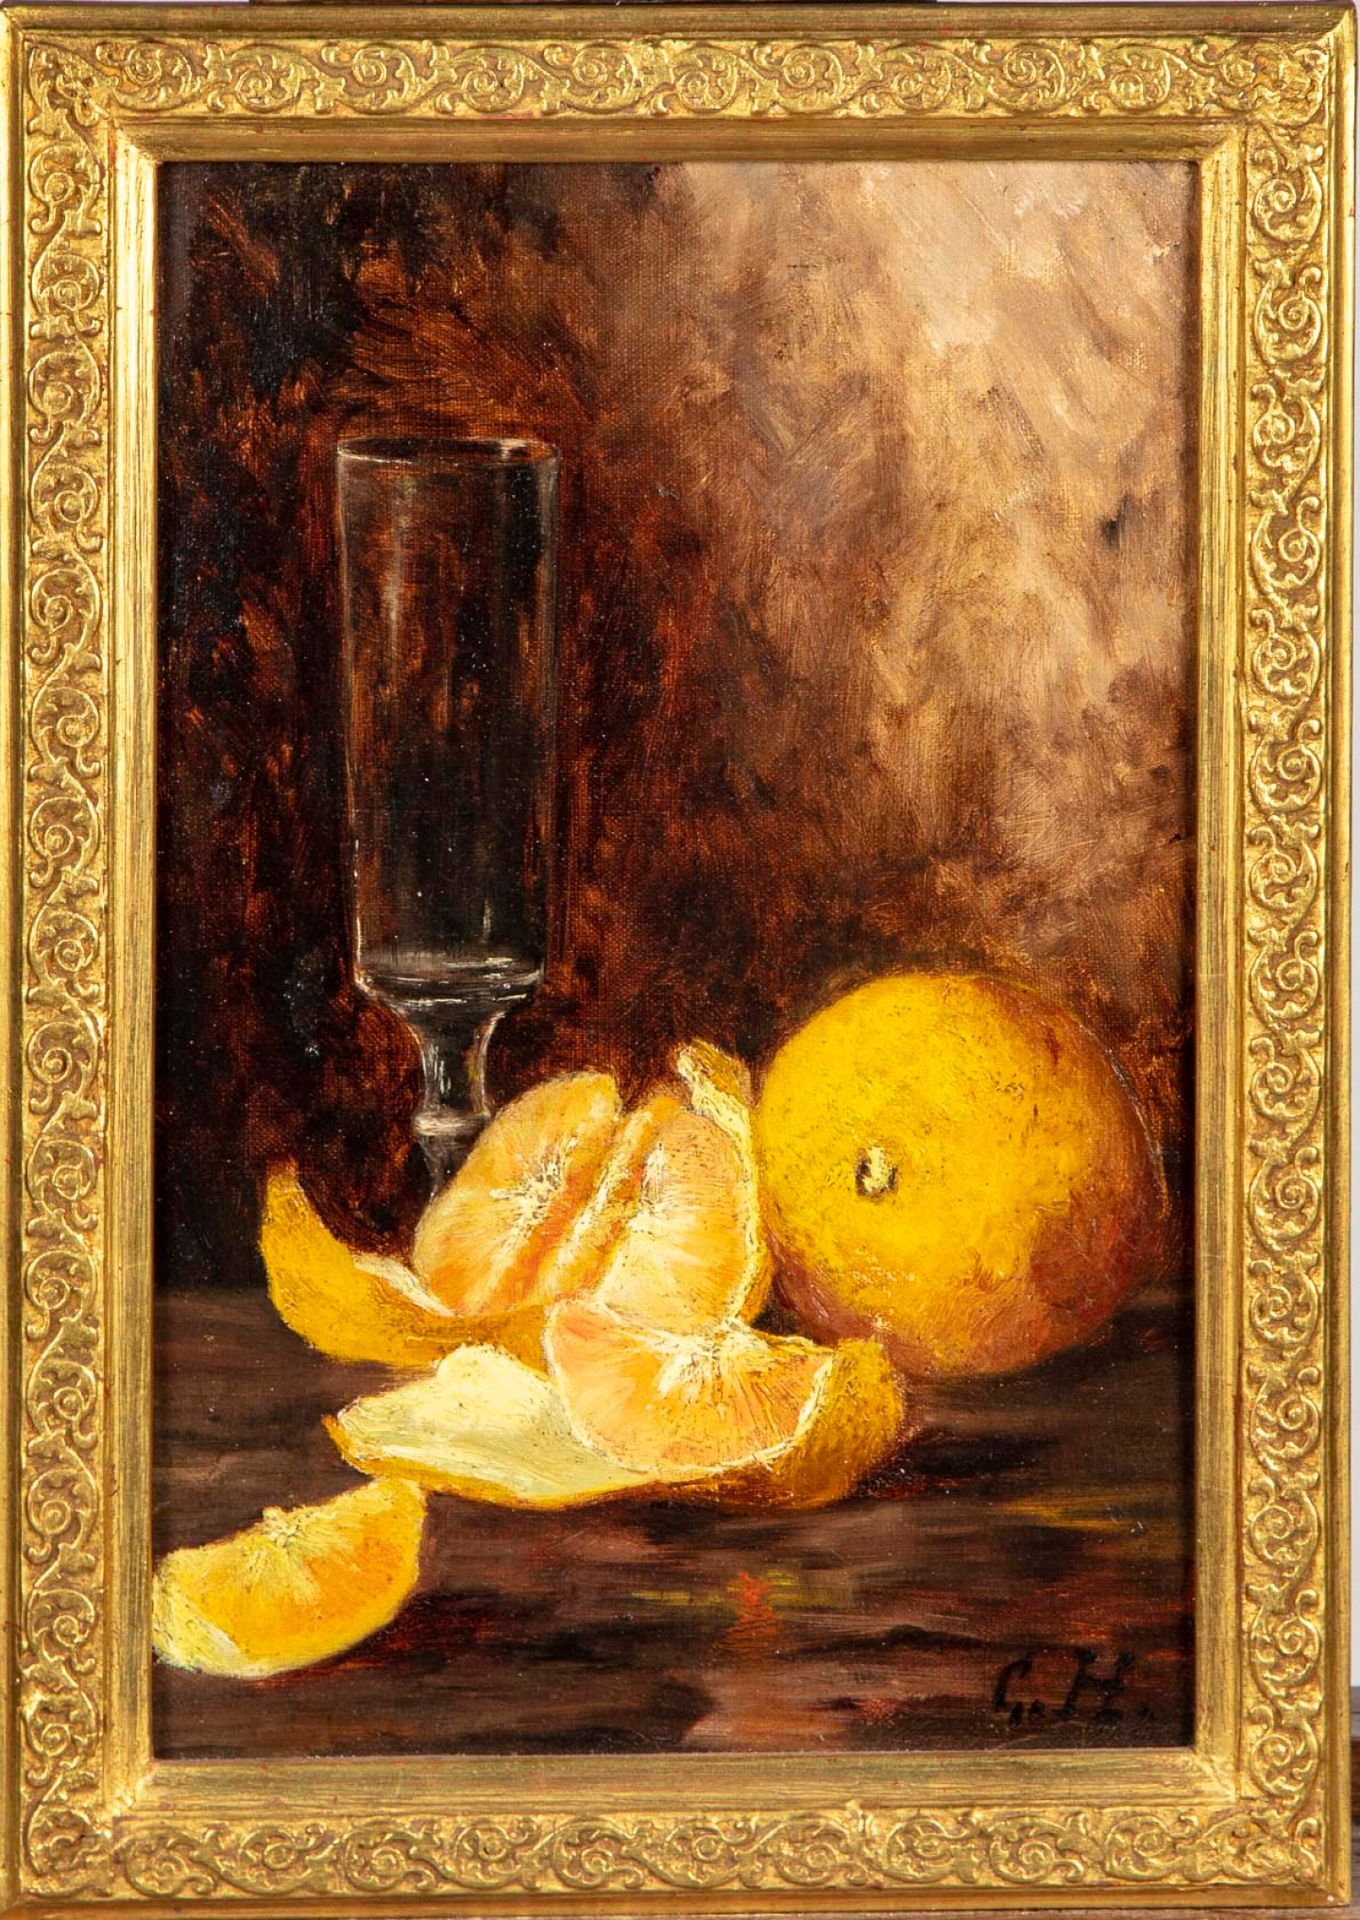 ECOLE FRANCAISE FRENCH SCHOOL

Still Life with Oranges

Oil on canvas

Monogramm&hellip;